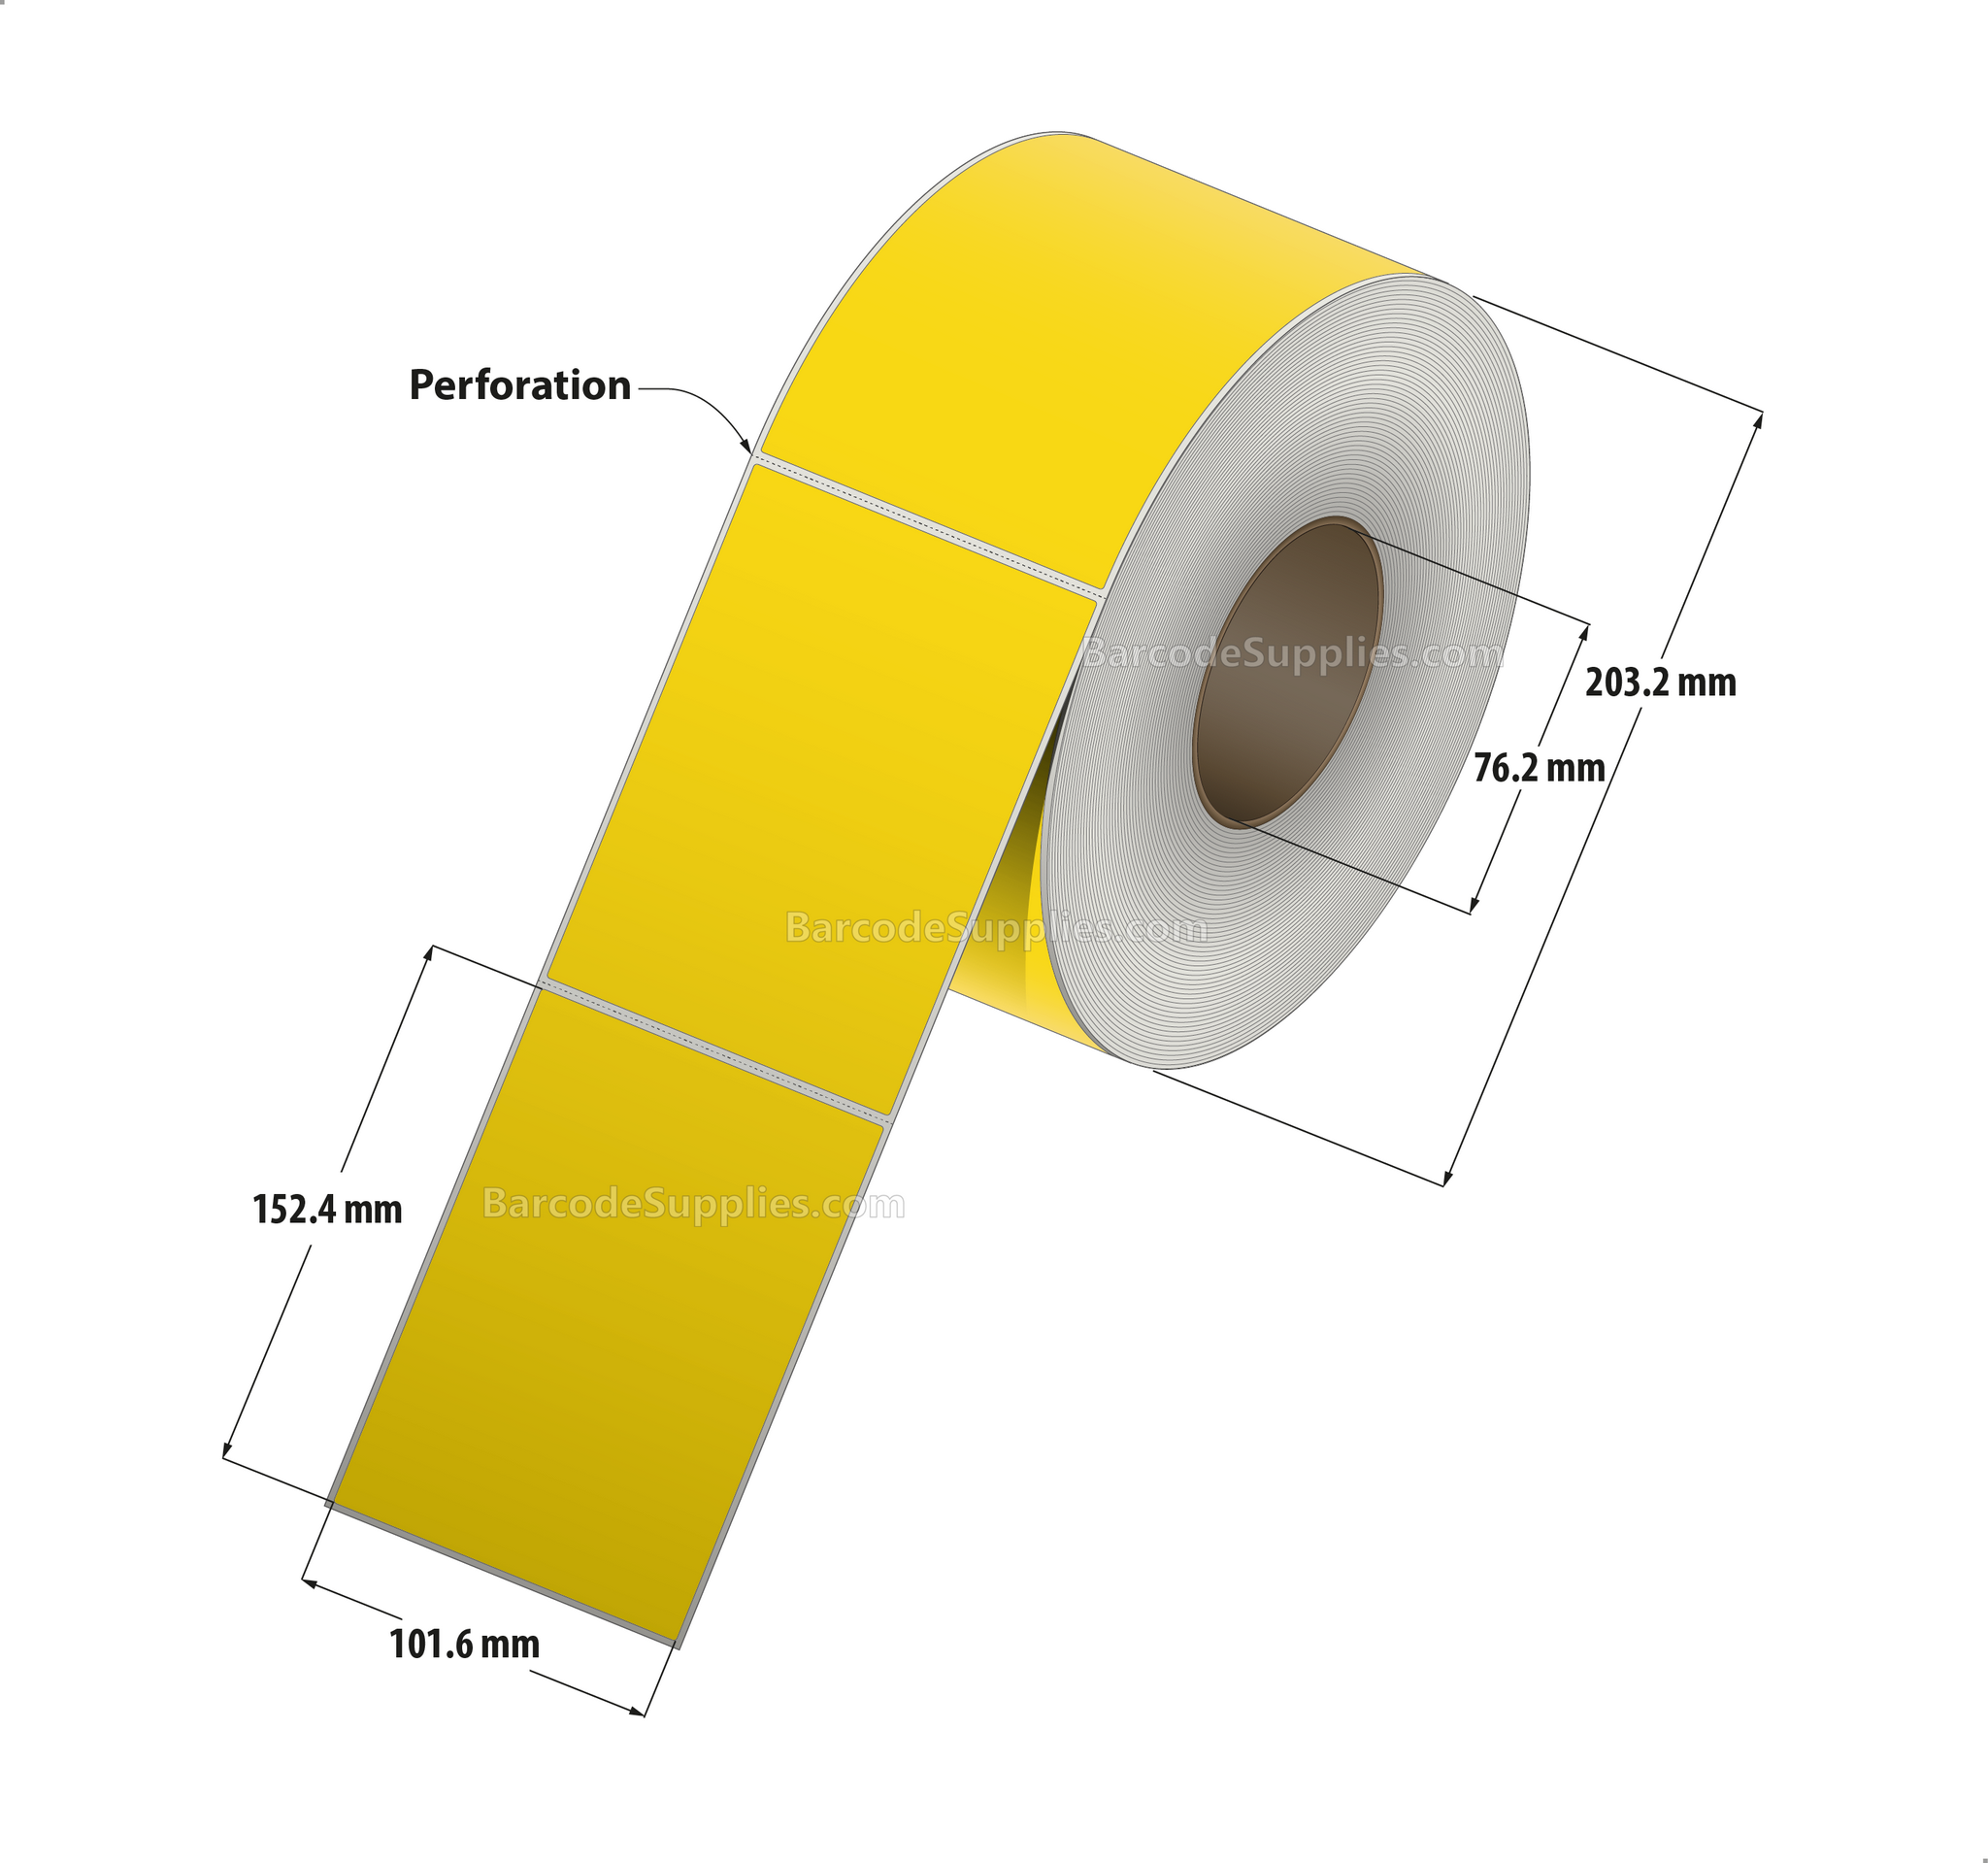 4 x 6 Direct Thermal Pantone Yellow Labels With Permanent Acrylic Adhesive - Perforated - 1000 Labels Per Roll - Carton Of 4 Rolls - 4000 Labels Total - MPN: DT46-1PY